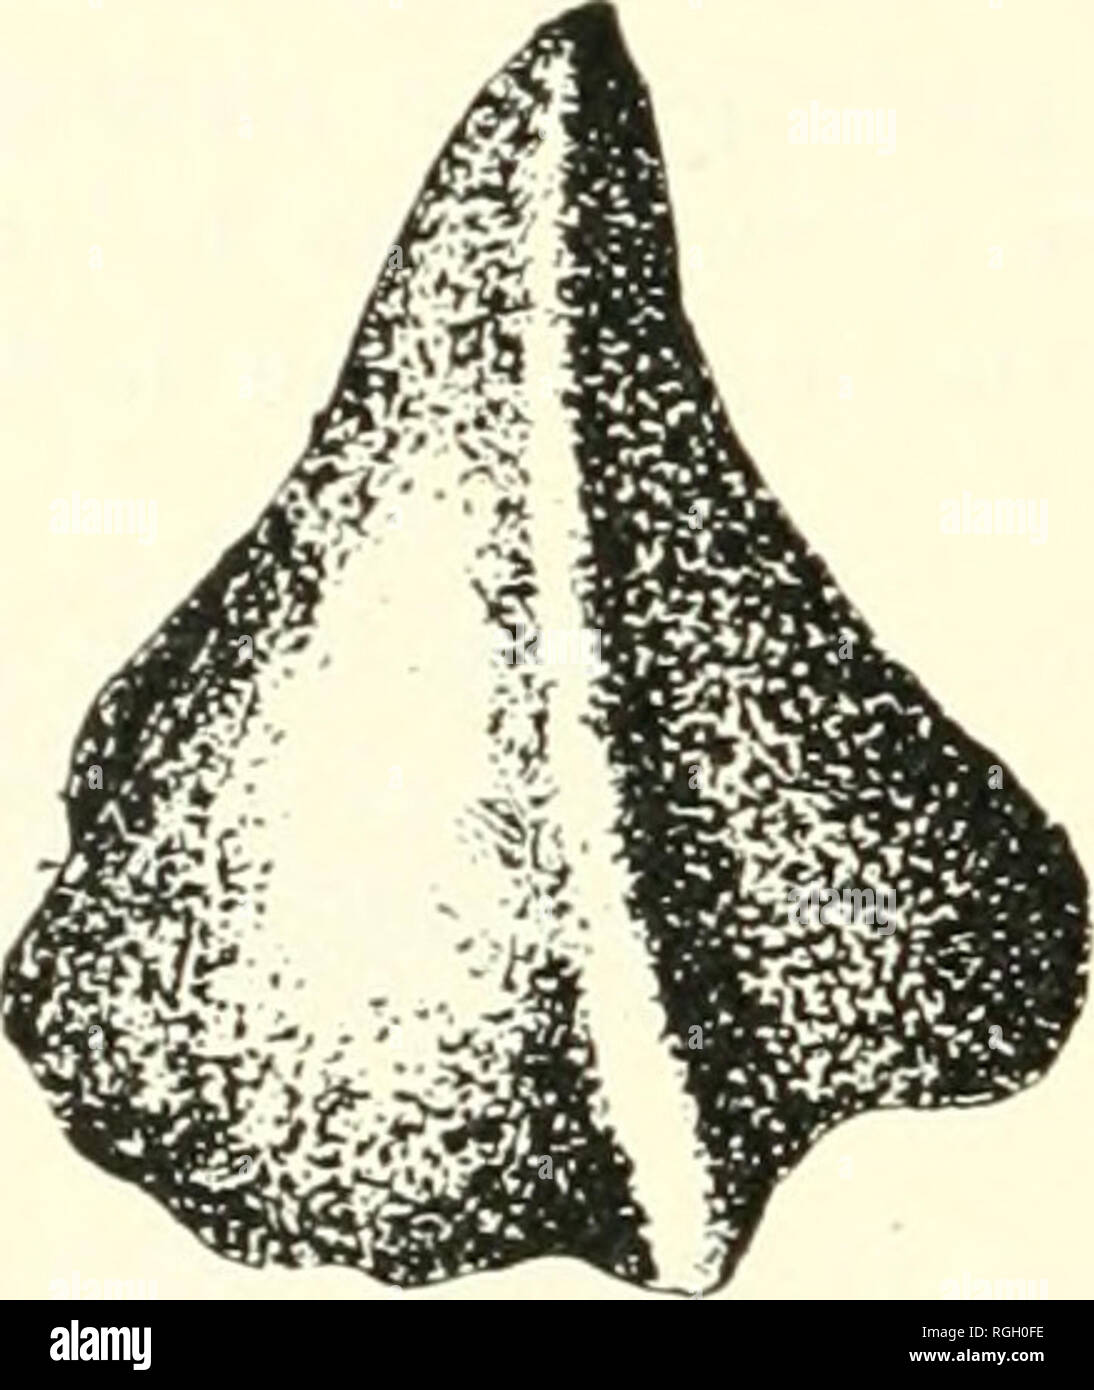 . Bulletin of the Buffalo Society of Natural Sciences. Natural history; Science. Fig. 194. Platyceras erectum (after Hallj. Platyceras ERECTUM. Hall. (Fig. 1U4.) (Pal.N.Y.,Vol. v., Pt. II., p. 5, PI. II.) Distin^-uishing Characters.—Closely iiirolled apex, for one and one-half volutions; rapidly exj)anding lower portion; outer surface regularly arcuate to the inrolled spire: concentric laniellose striae, arched abruptly over nar- row bands, marking former sinuosities in the peristome. Found in the Demissa beds, at Section 5 (where small individuals, probably of this species, are com- mon). Pla Stock Photo